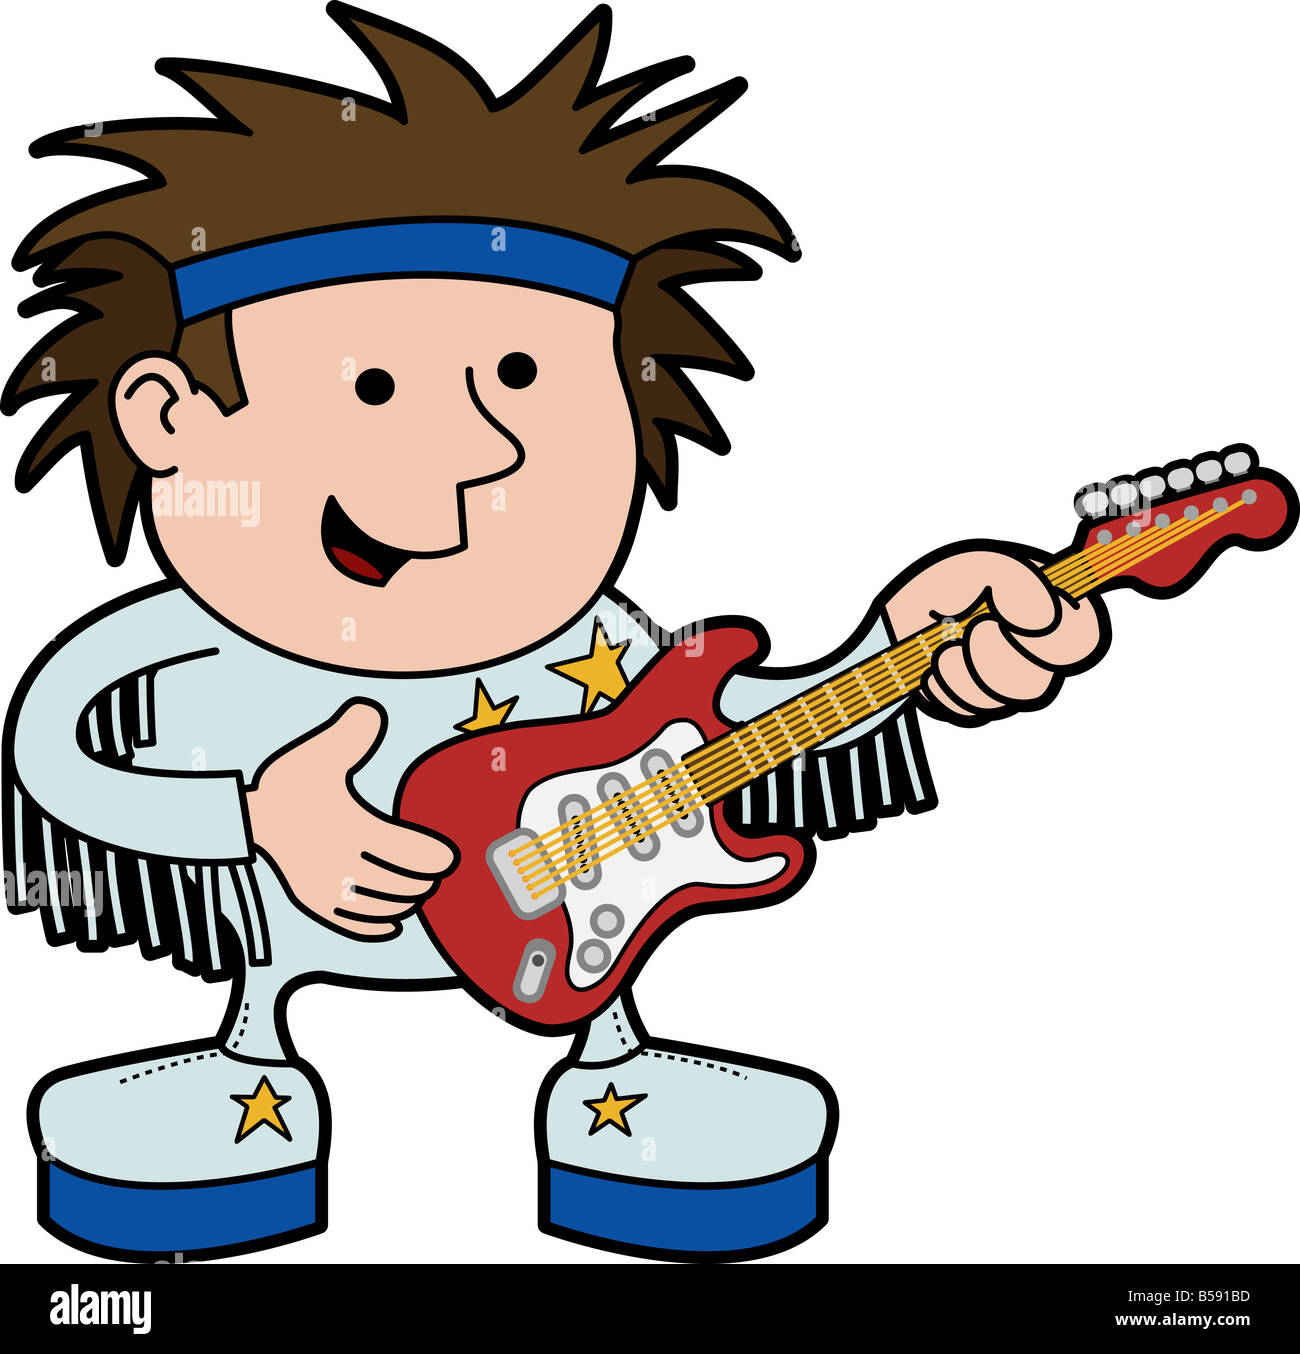 Illustration of rock and roll musician with electric guitar Stock Photo